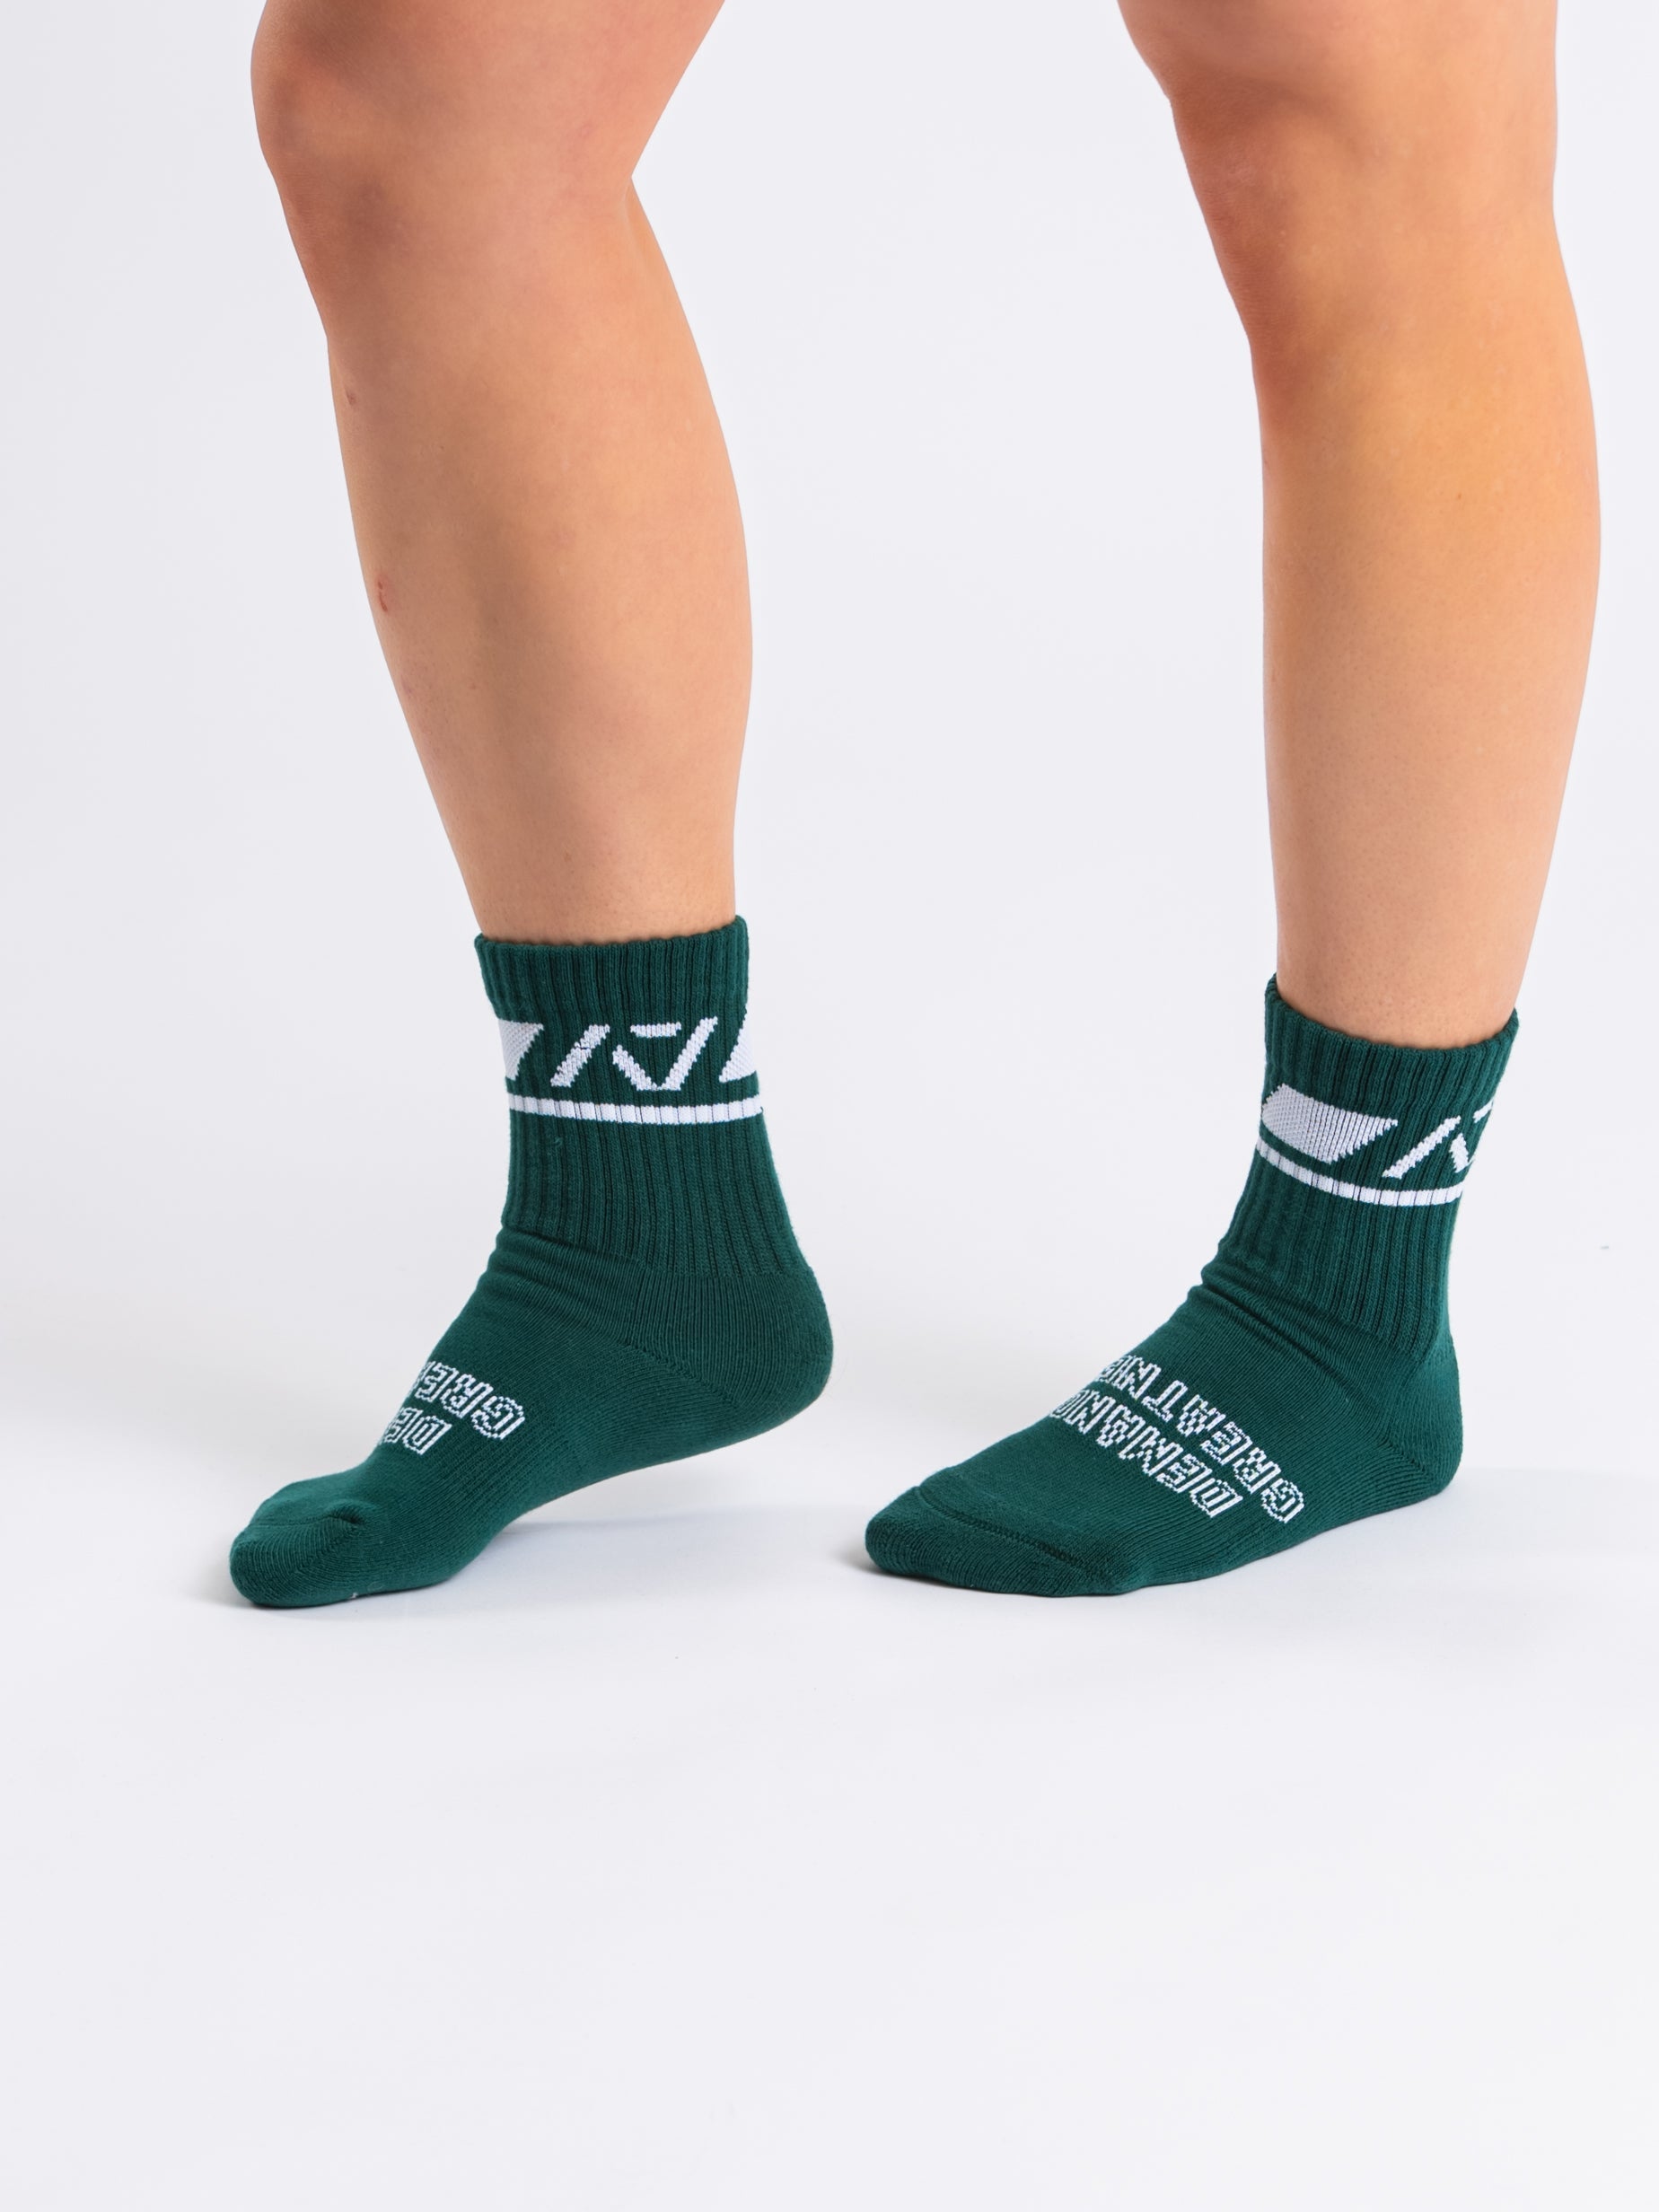 A7 Emerald Forás Crew socks showcase pink logos and let your energy show on the platform, in your training or while out and about. The IPF Approved Night Light Meet Kit includes Powerlifting Singlet, A7 Meet Shirt, A7 Zebra Wrist Wraps, A7 Deadlift Socks, Hourglass Knee Sleeves (Stiff Knee Sleeves and Rigor Mortis Knee Sleeves). All A7 Powerlifting Equipment shipping to UK, Norway, Switzerland and Iceland.